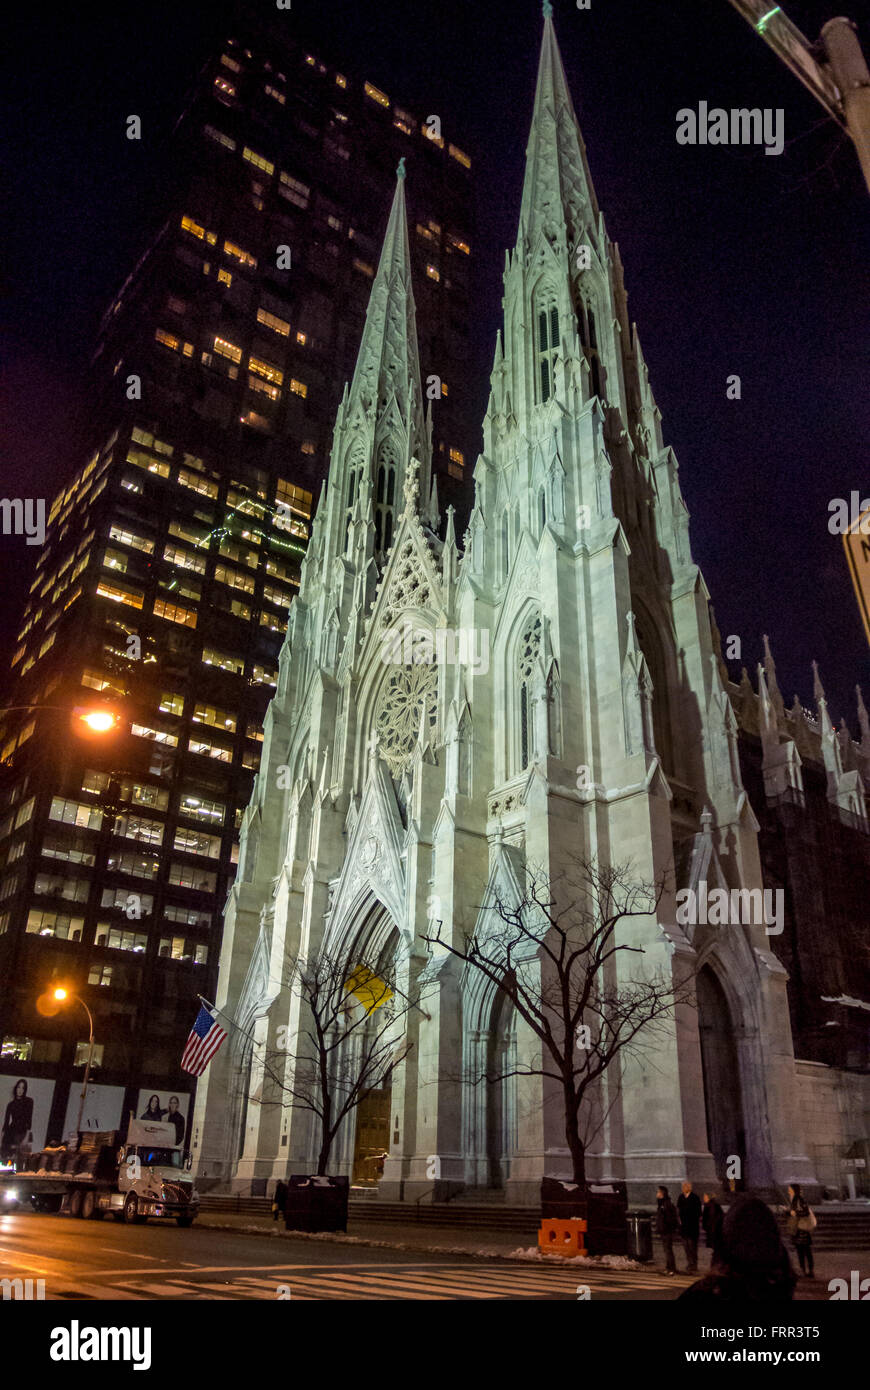 St. Patrick's Cathedral exterior at night, New York city, USA. Stock Photo